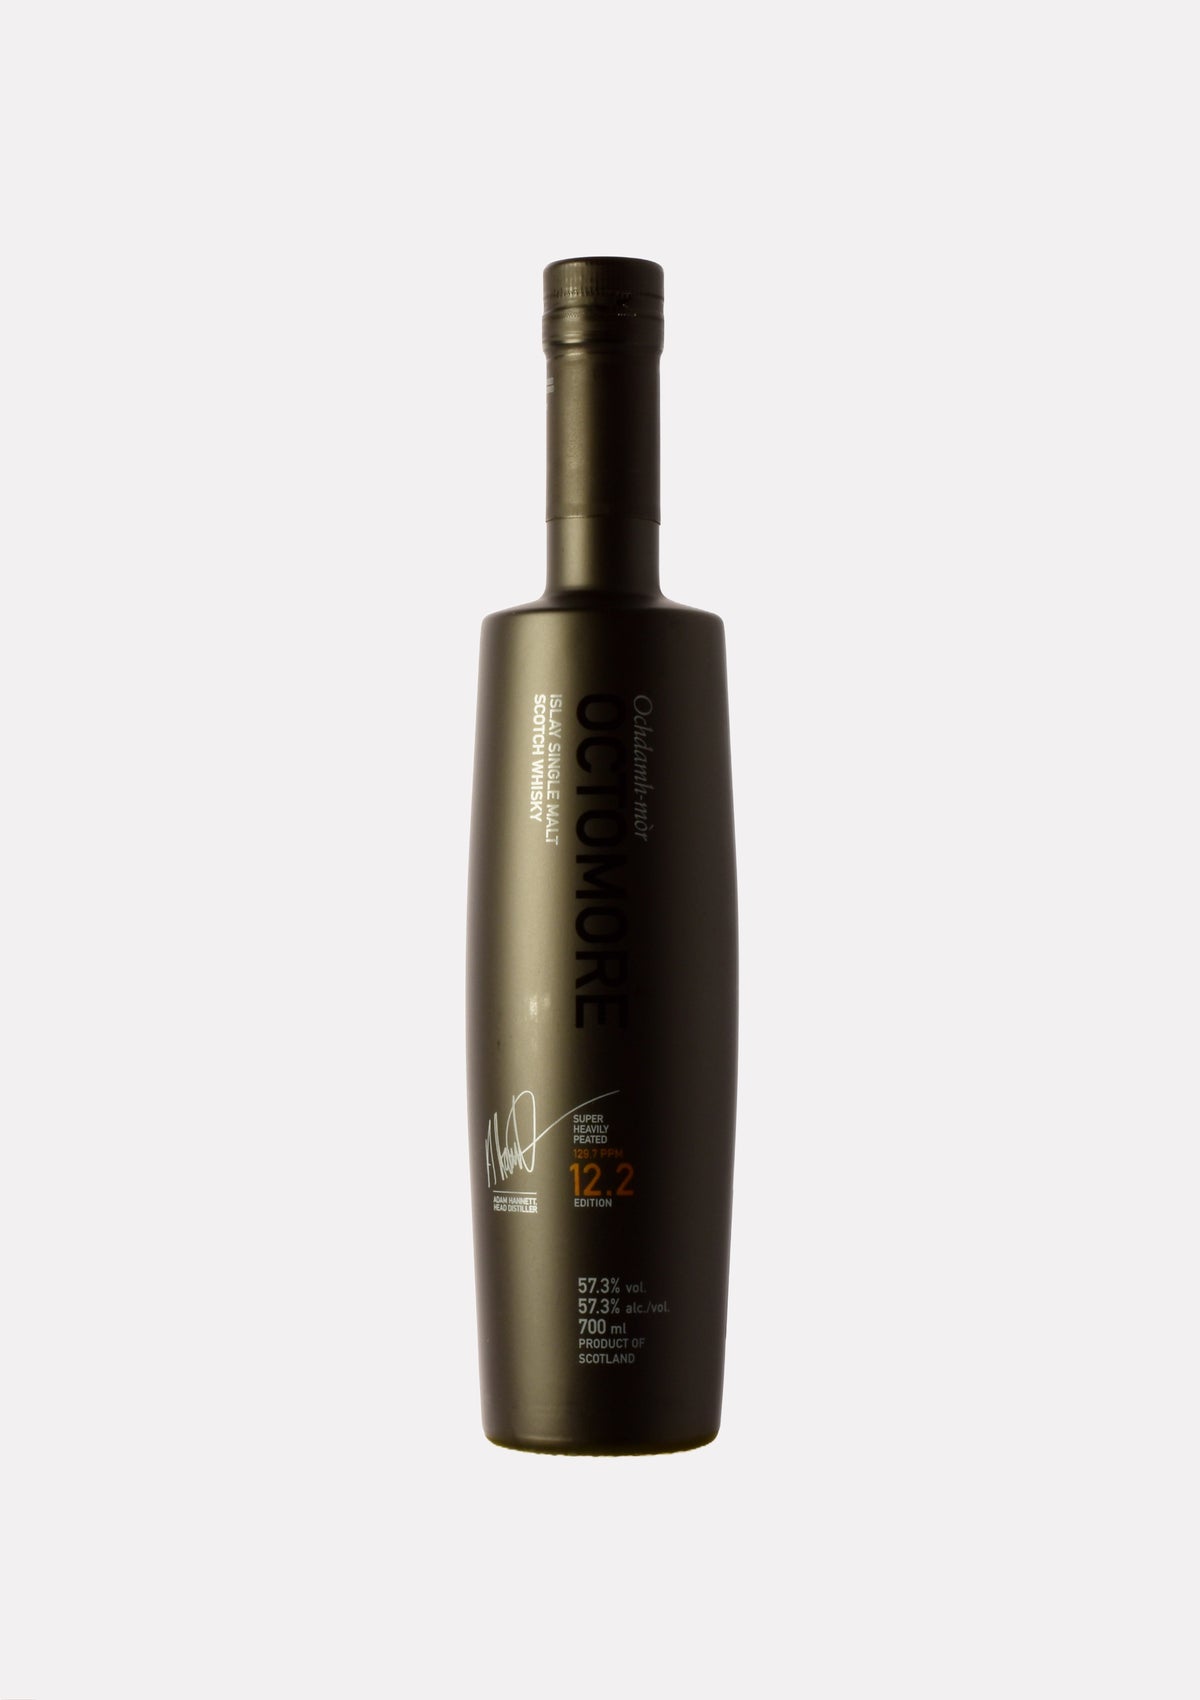 Octomore 12.2 129.7 ppm